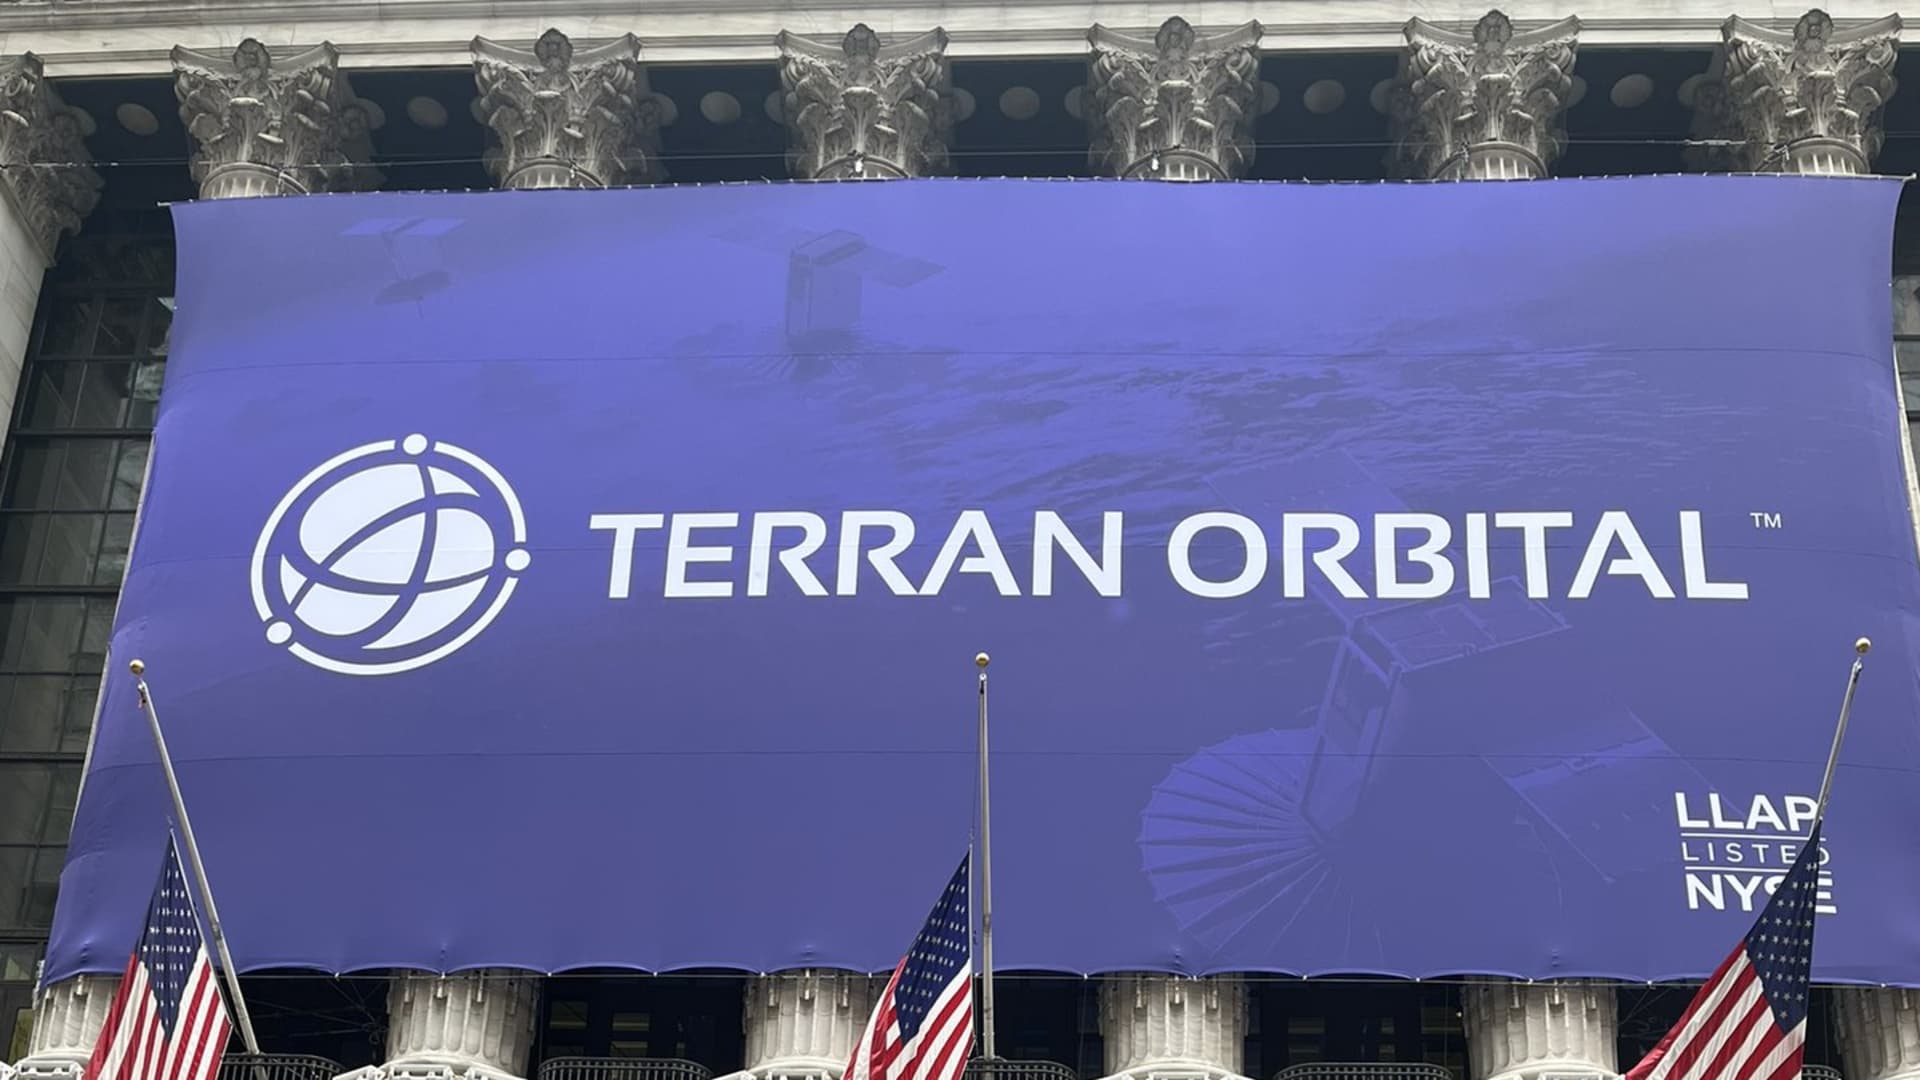 Terran Orbital starts trading on the NYSE with 0 million in outstanding spacecraft orders